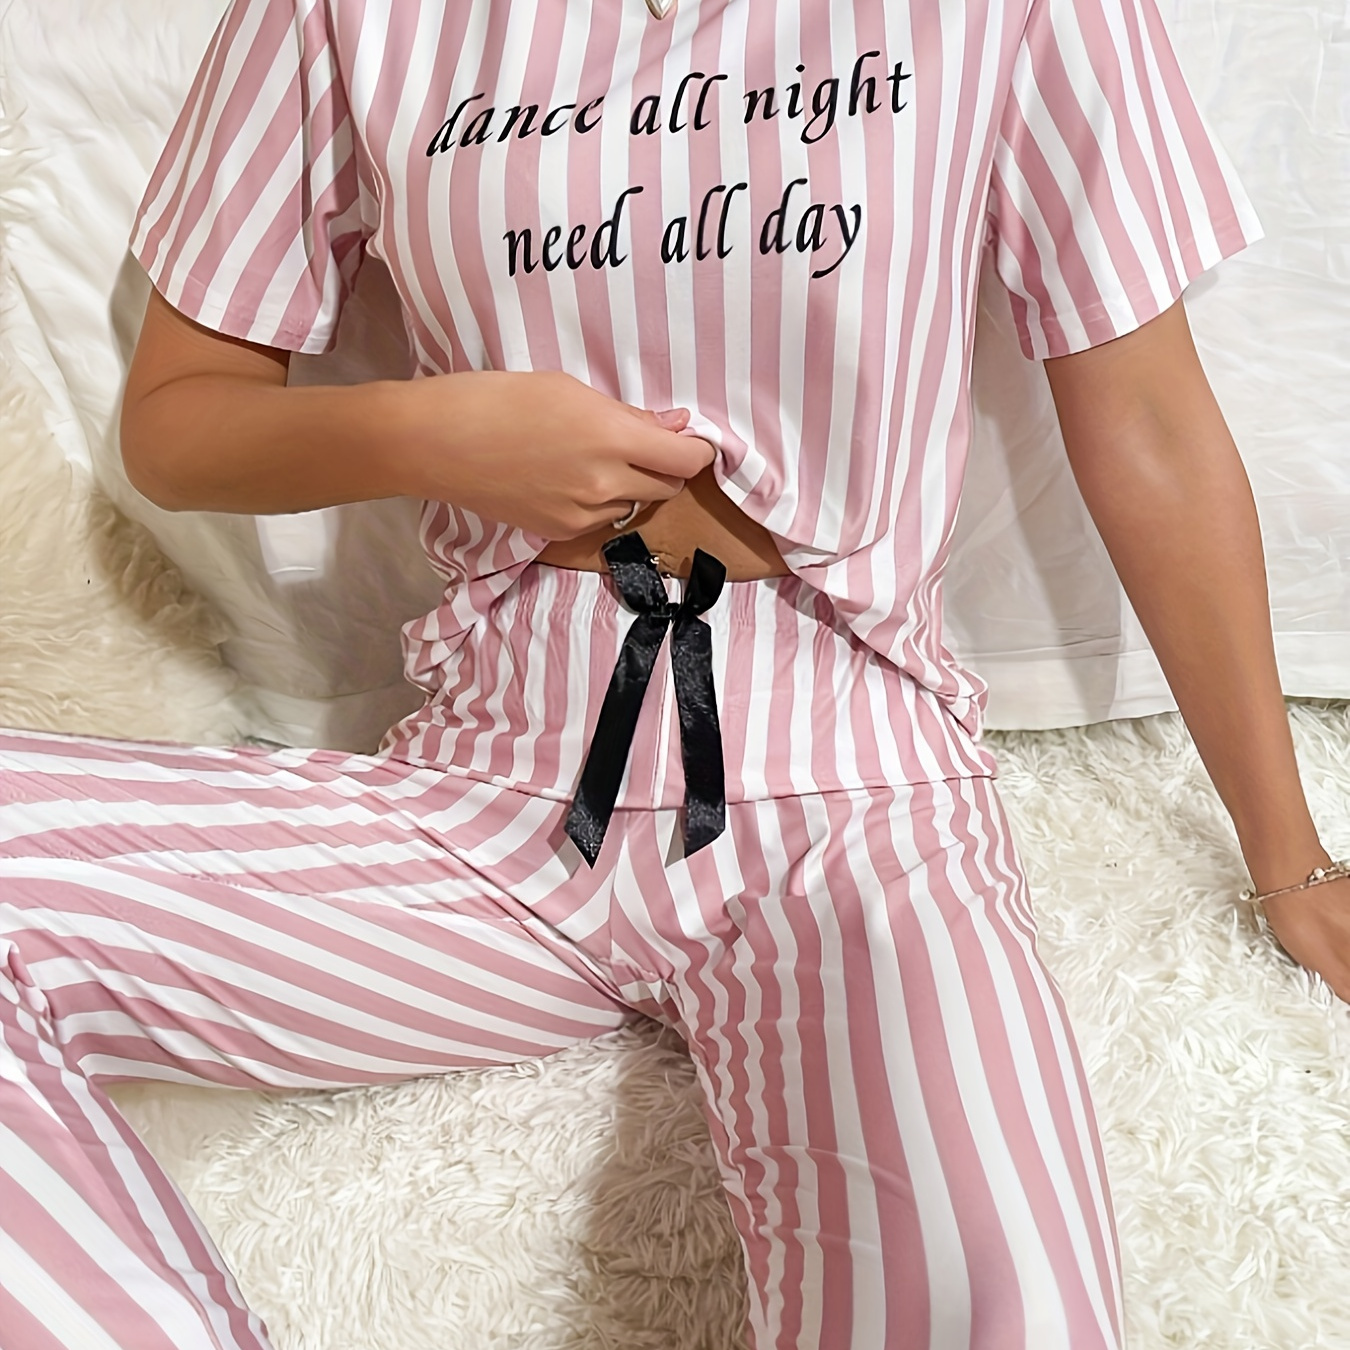 

Women's Slogan & Stripe Print Casual Pajama Set, Short Sleeve Round Neck Top & Bow Pants, Comfortable Relaxed Fit